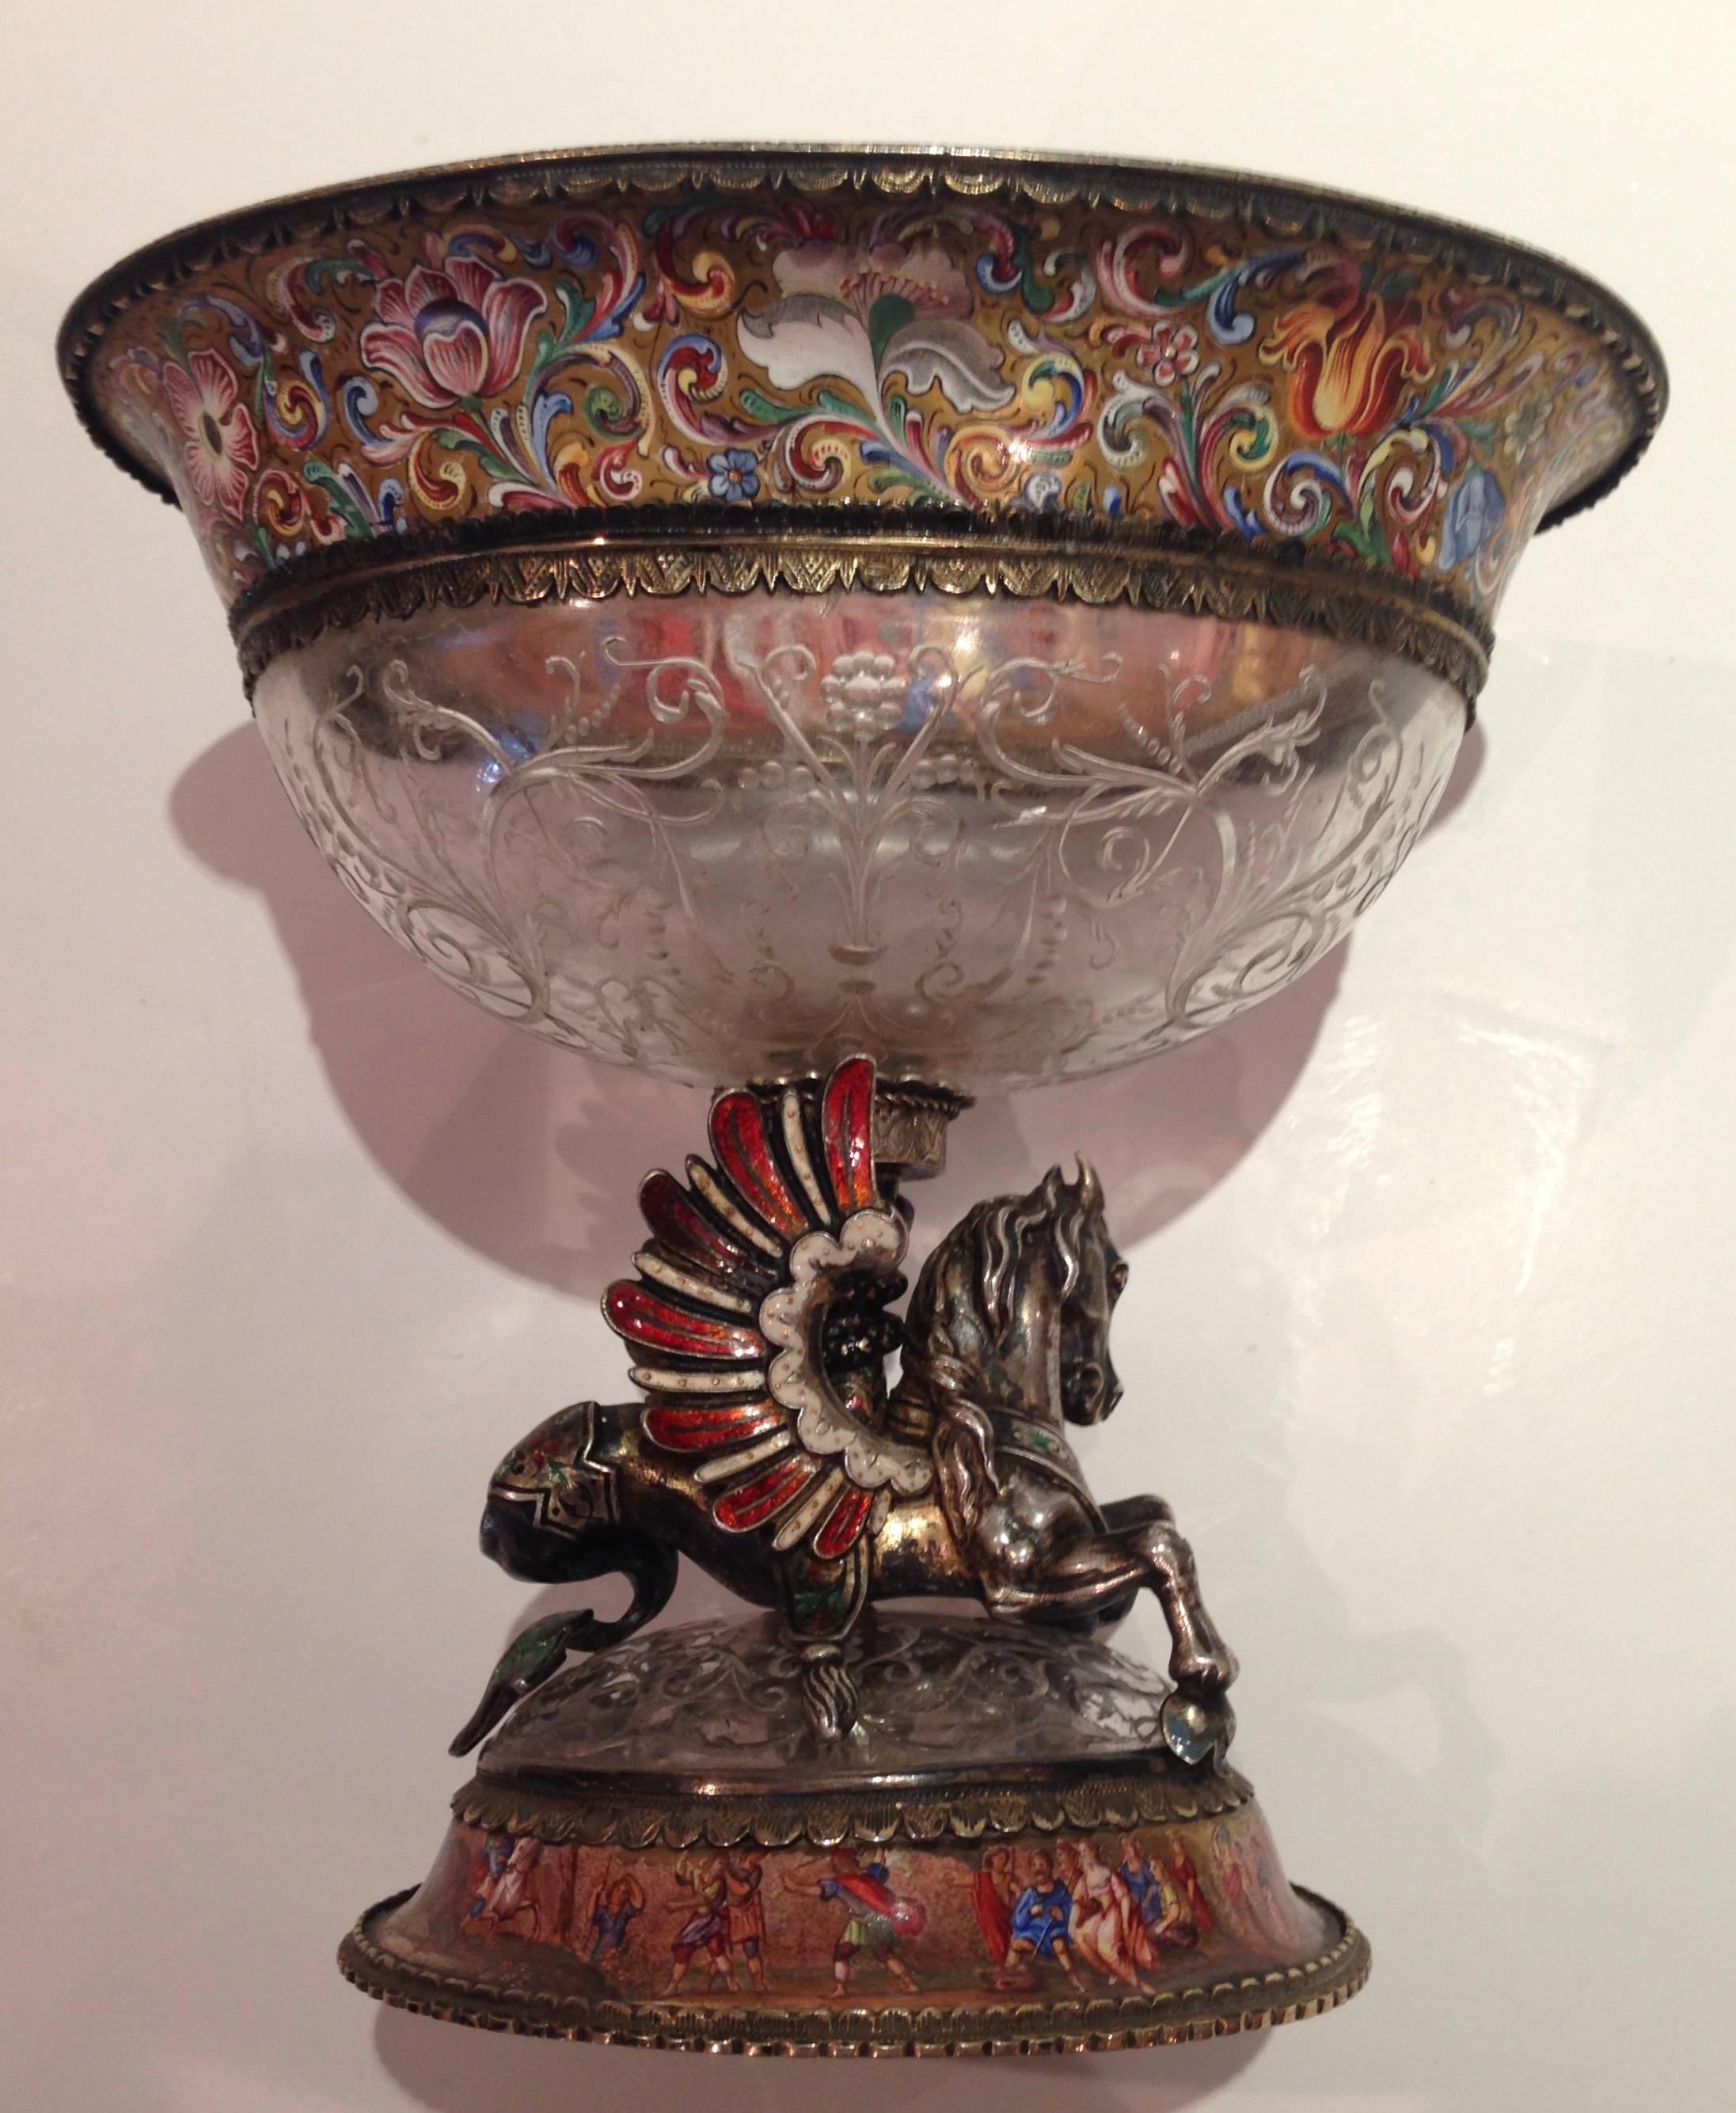 Beautiful enamel and finely engraved rock crystal coupe by Karl Bender 1874-1892. The wide border to the engraved rock crystal bowl is decorated with mythological figures supported by a silver Pegasus with outspread enamel wings.